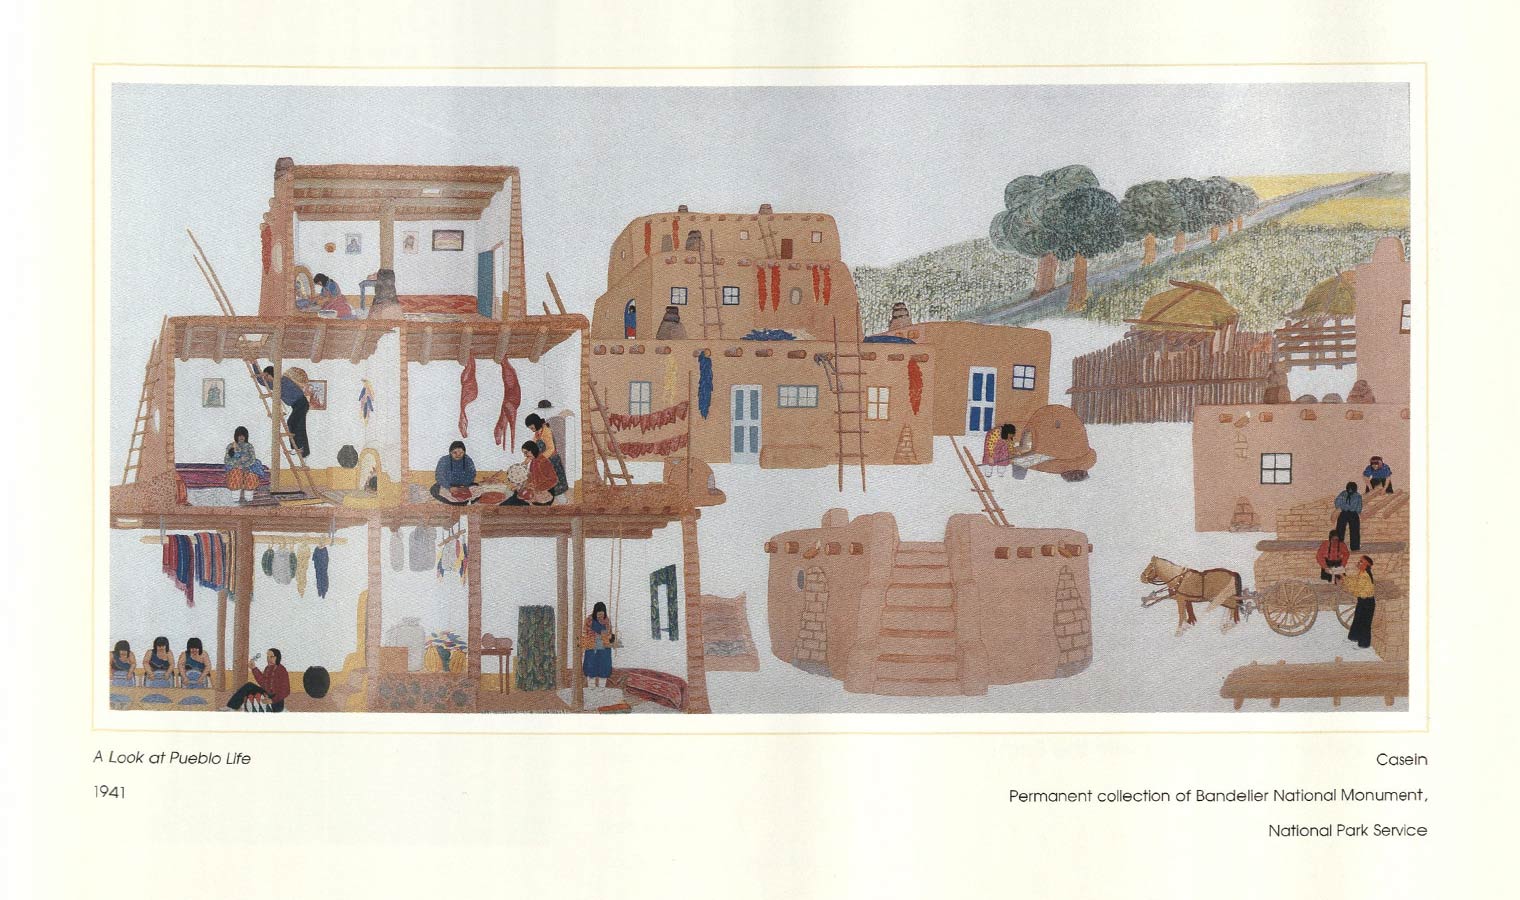 Painting "A Look at Pueblo Life" showing homes, furnishings, and people engaged in various routine activities